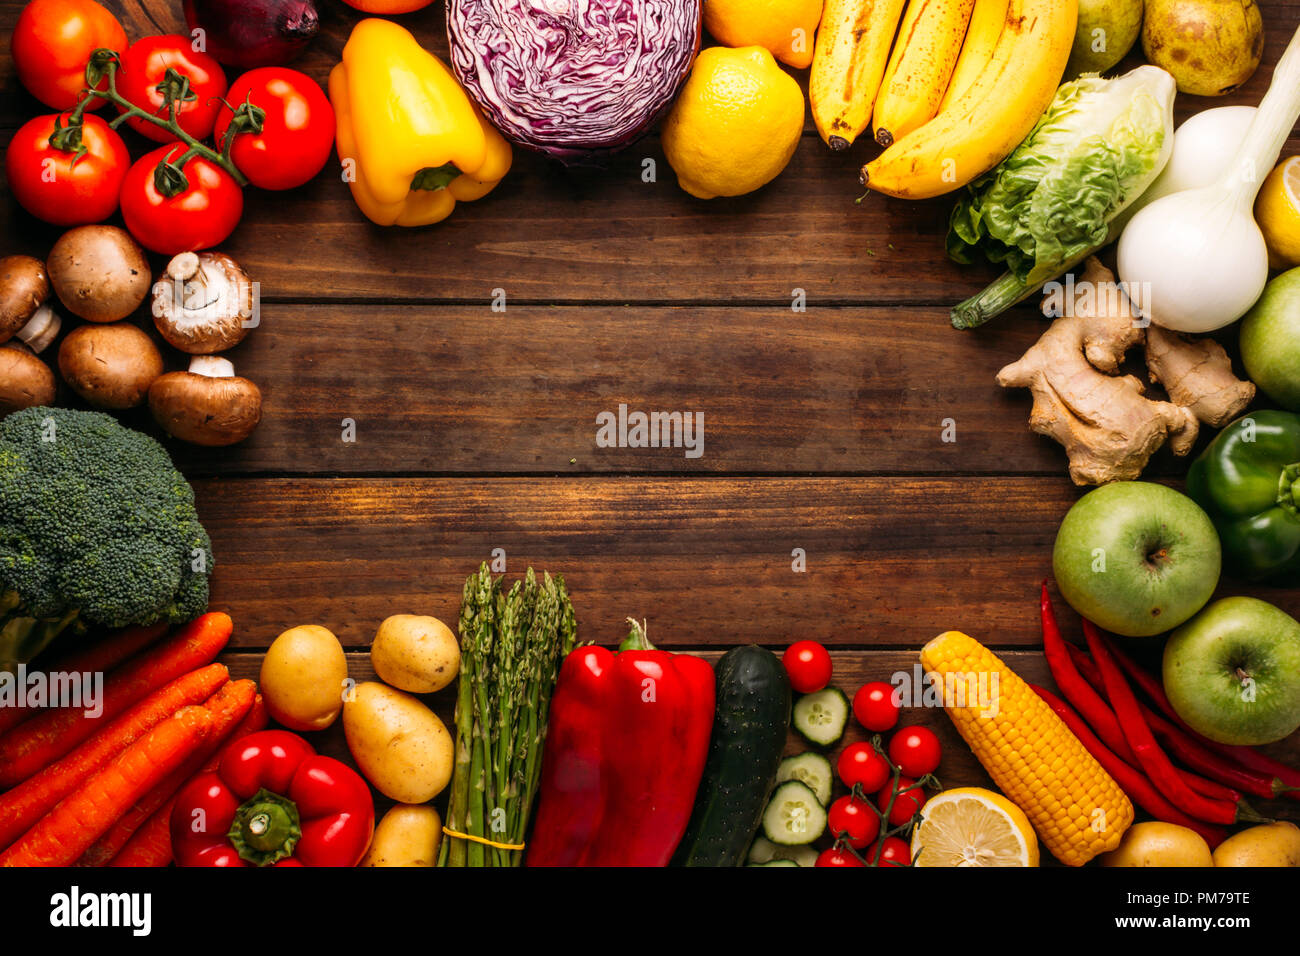 Top view of a wooden table full of fresh vegetables and fruits Stock Photo